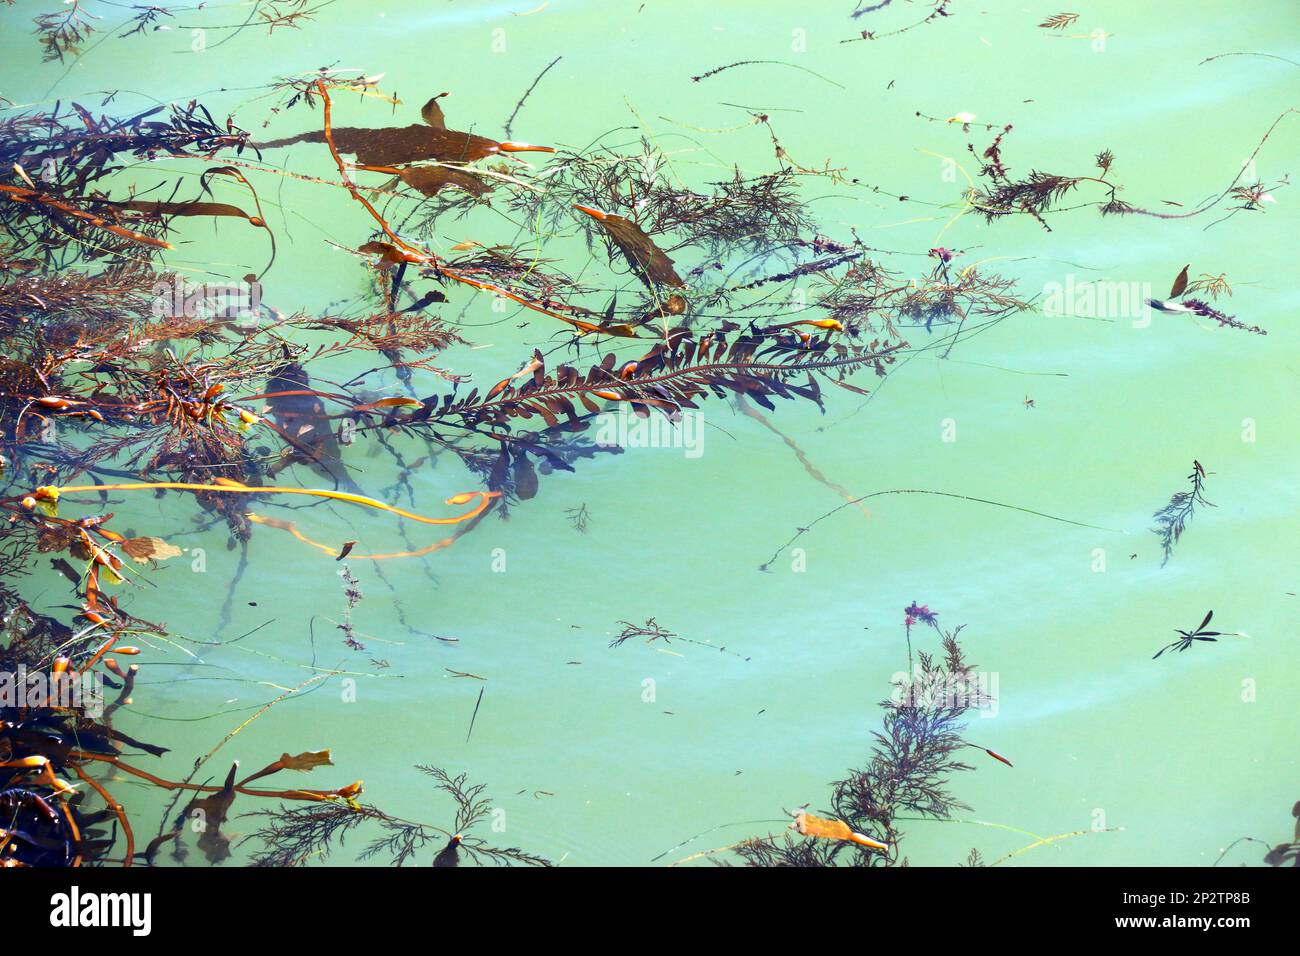 Strands of kelp floating in light green water. Stock Photo